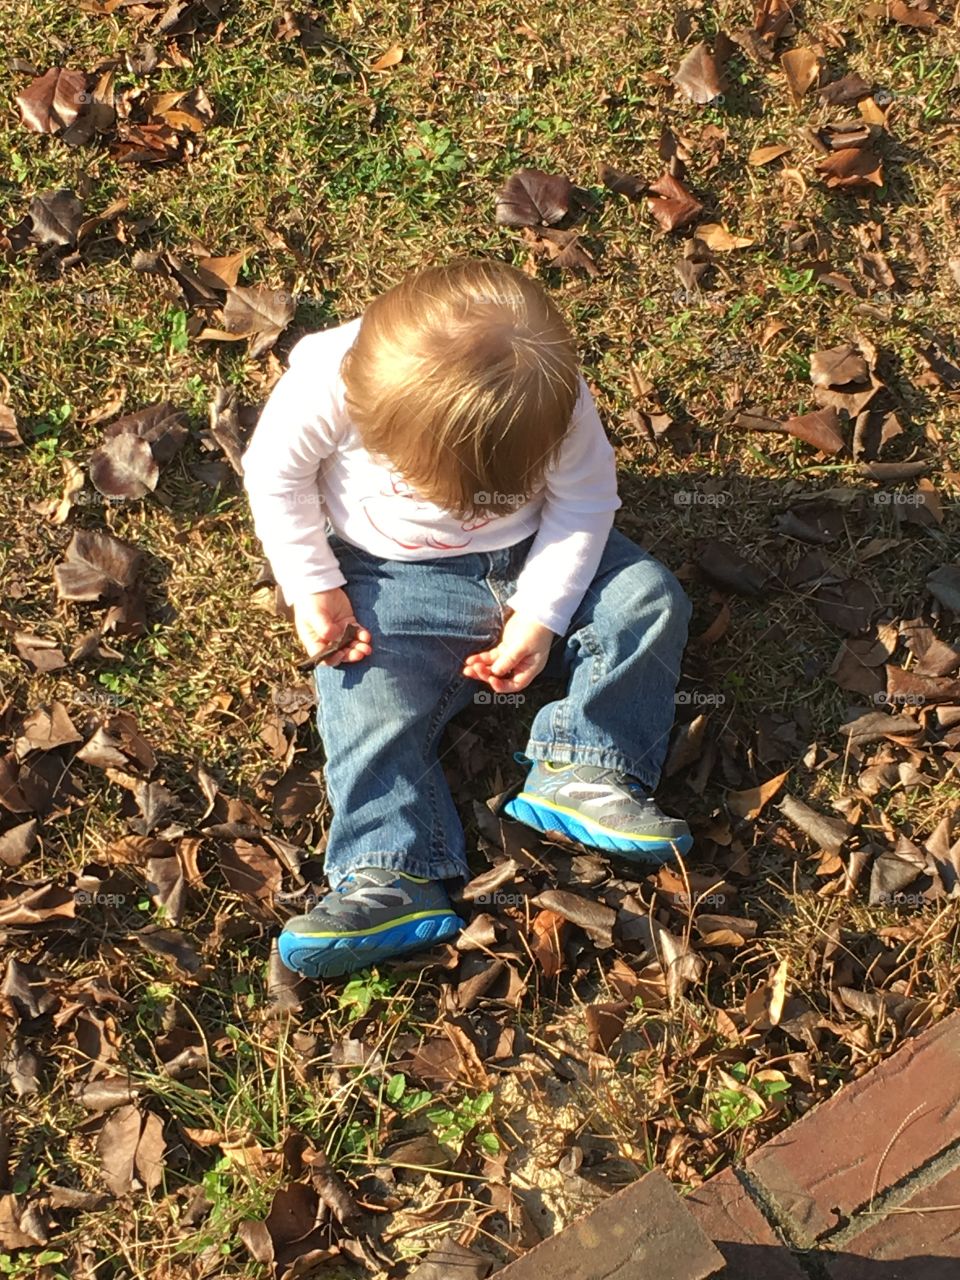 Baby sitting in grass with dead leaves.